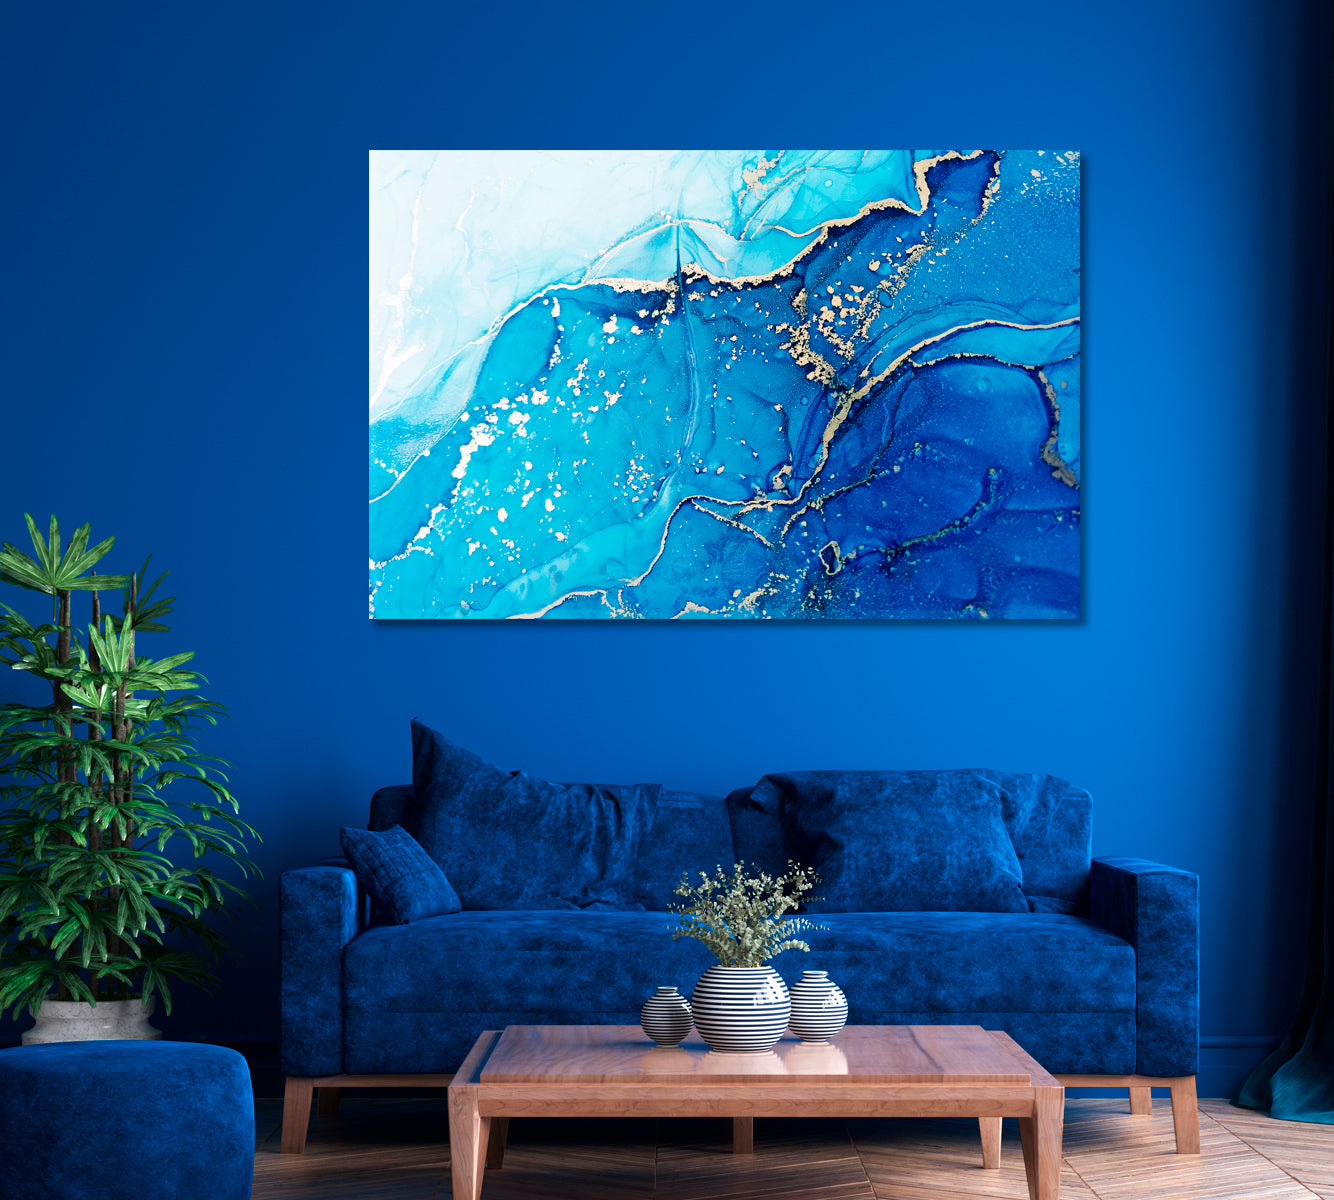 Abstract Blue Liquid Marble Spots Canvas Print ArtLexy 1 Panel 24"x16" inches 